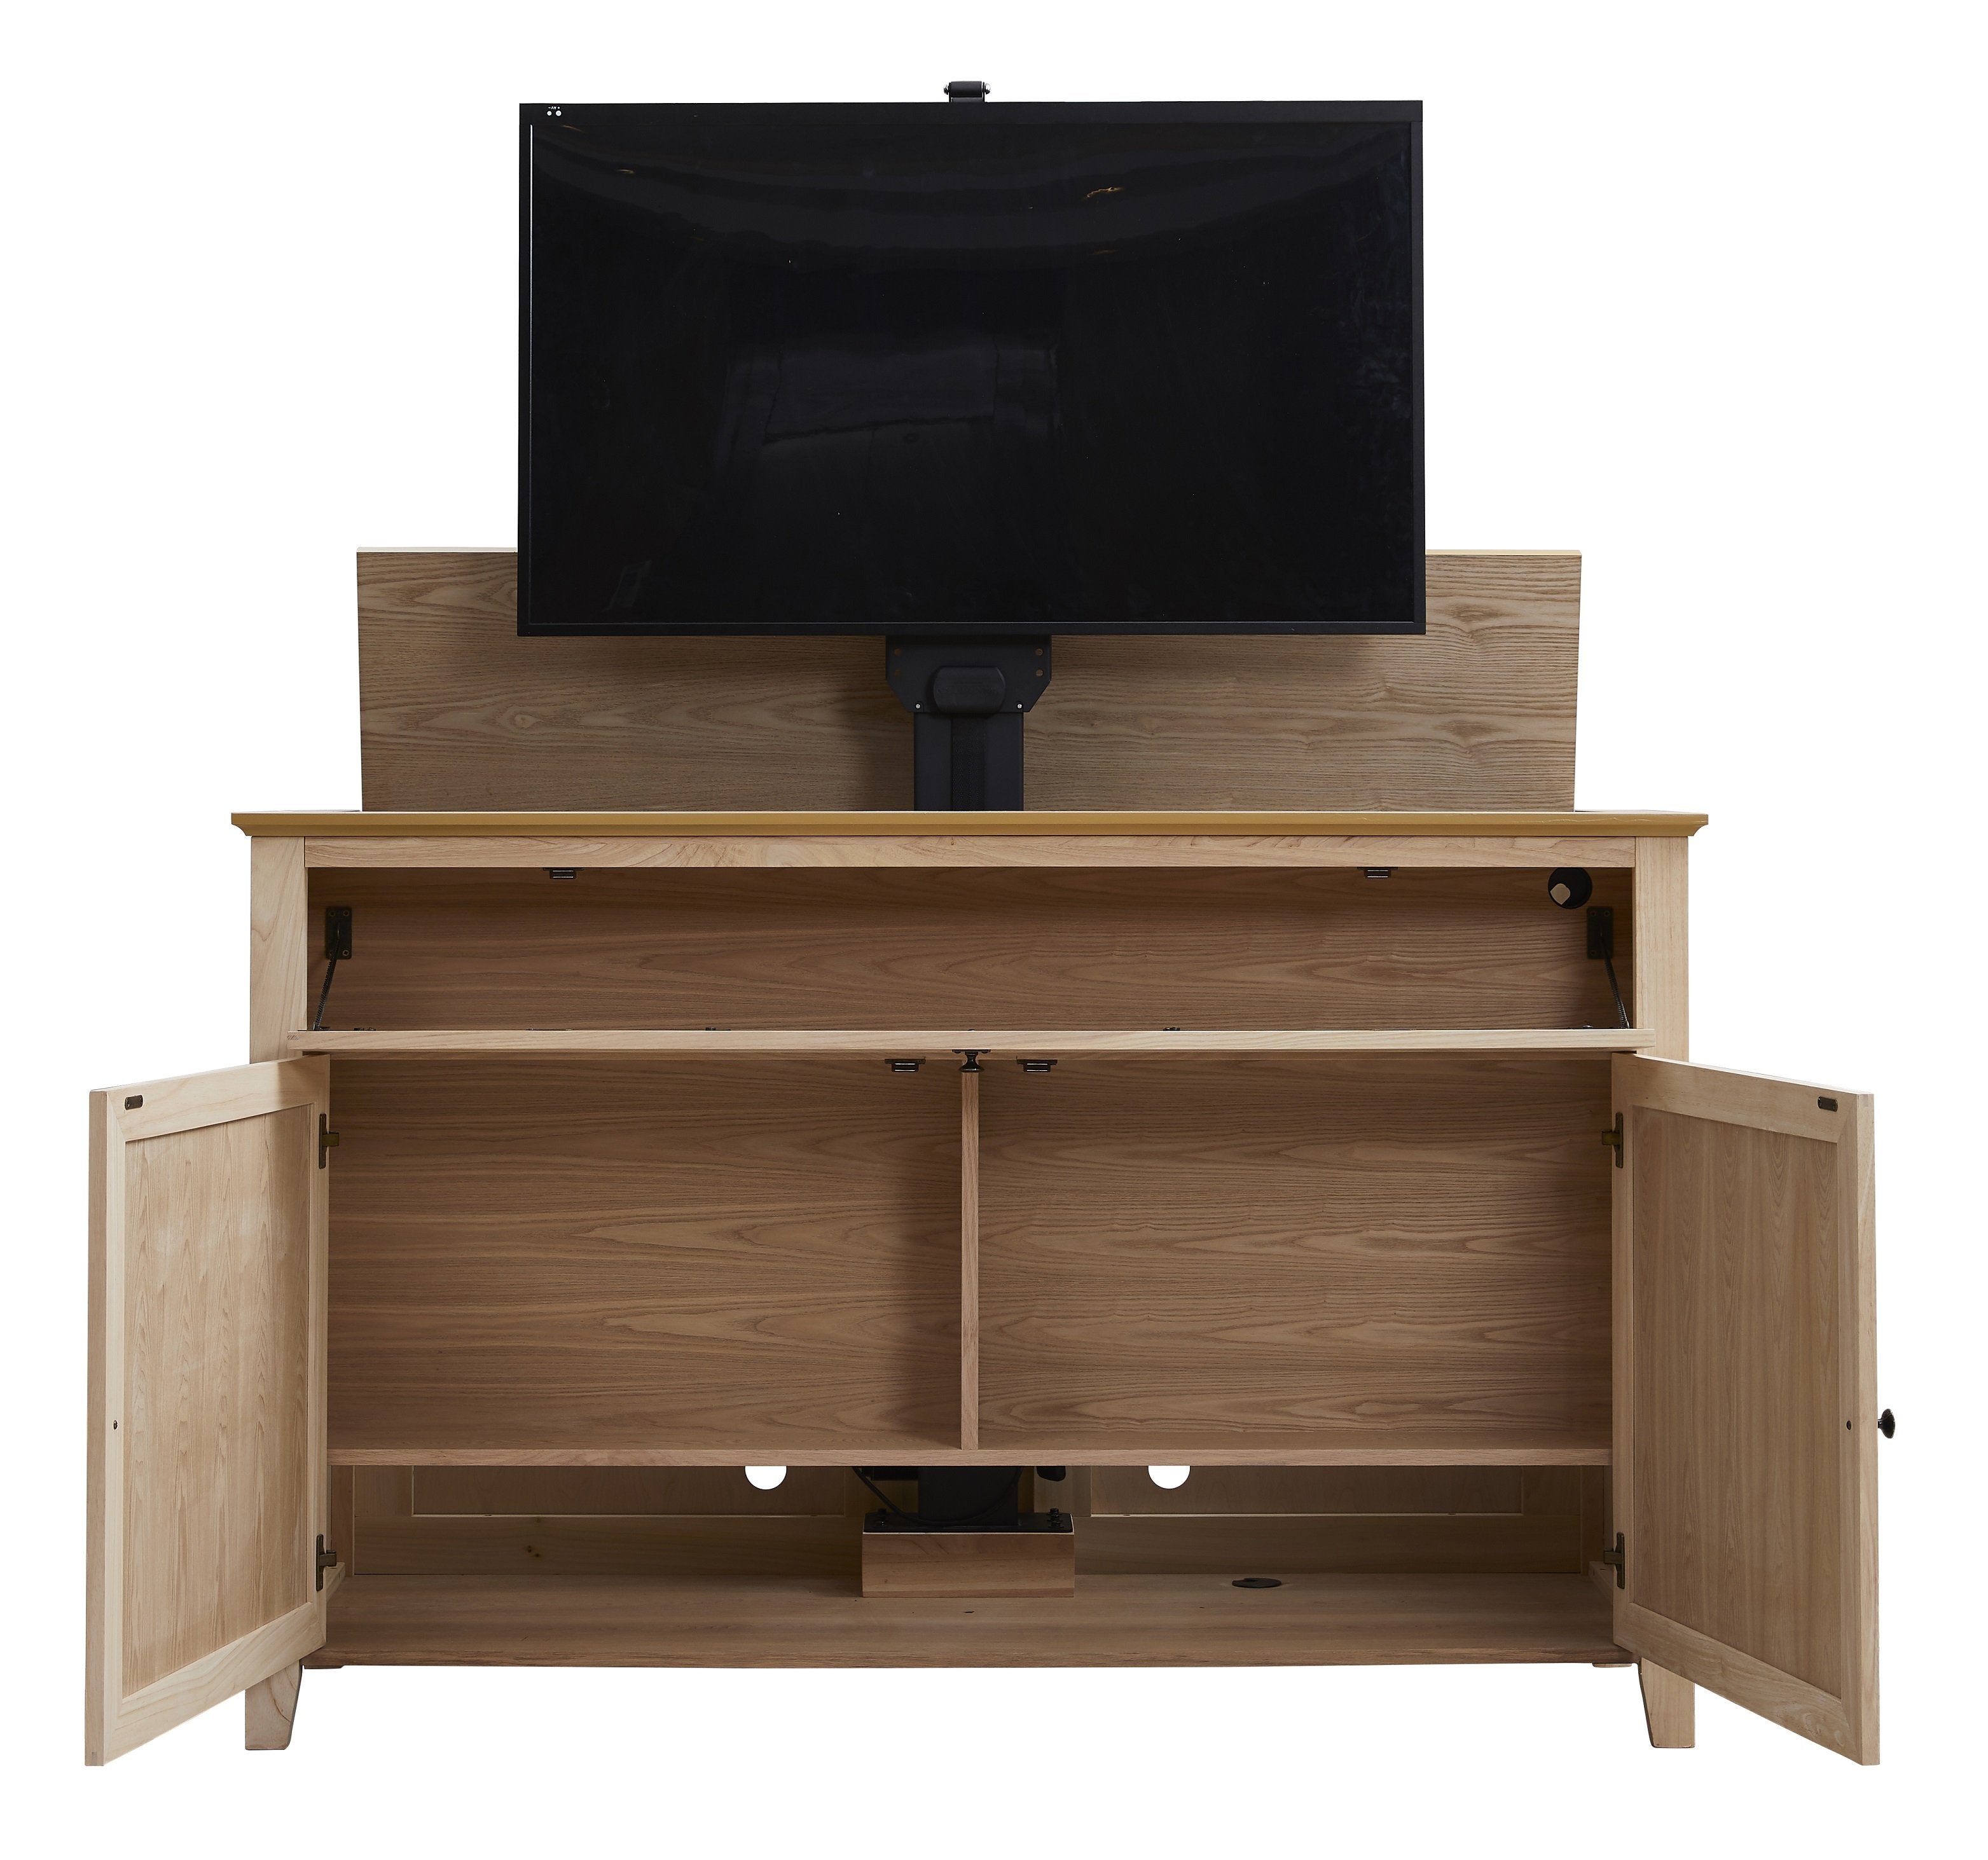 The Claymont Unfinished 70163 TV Lift Cabinet for 65 inch Flat screen TVs with all compartments opened. 